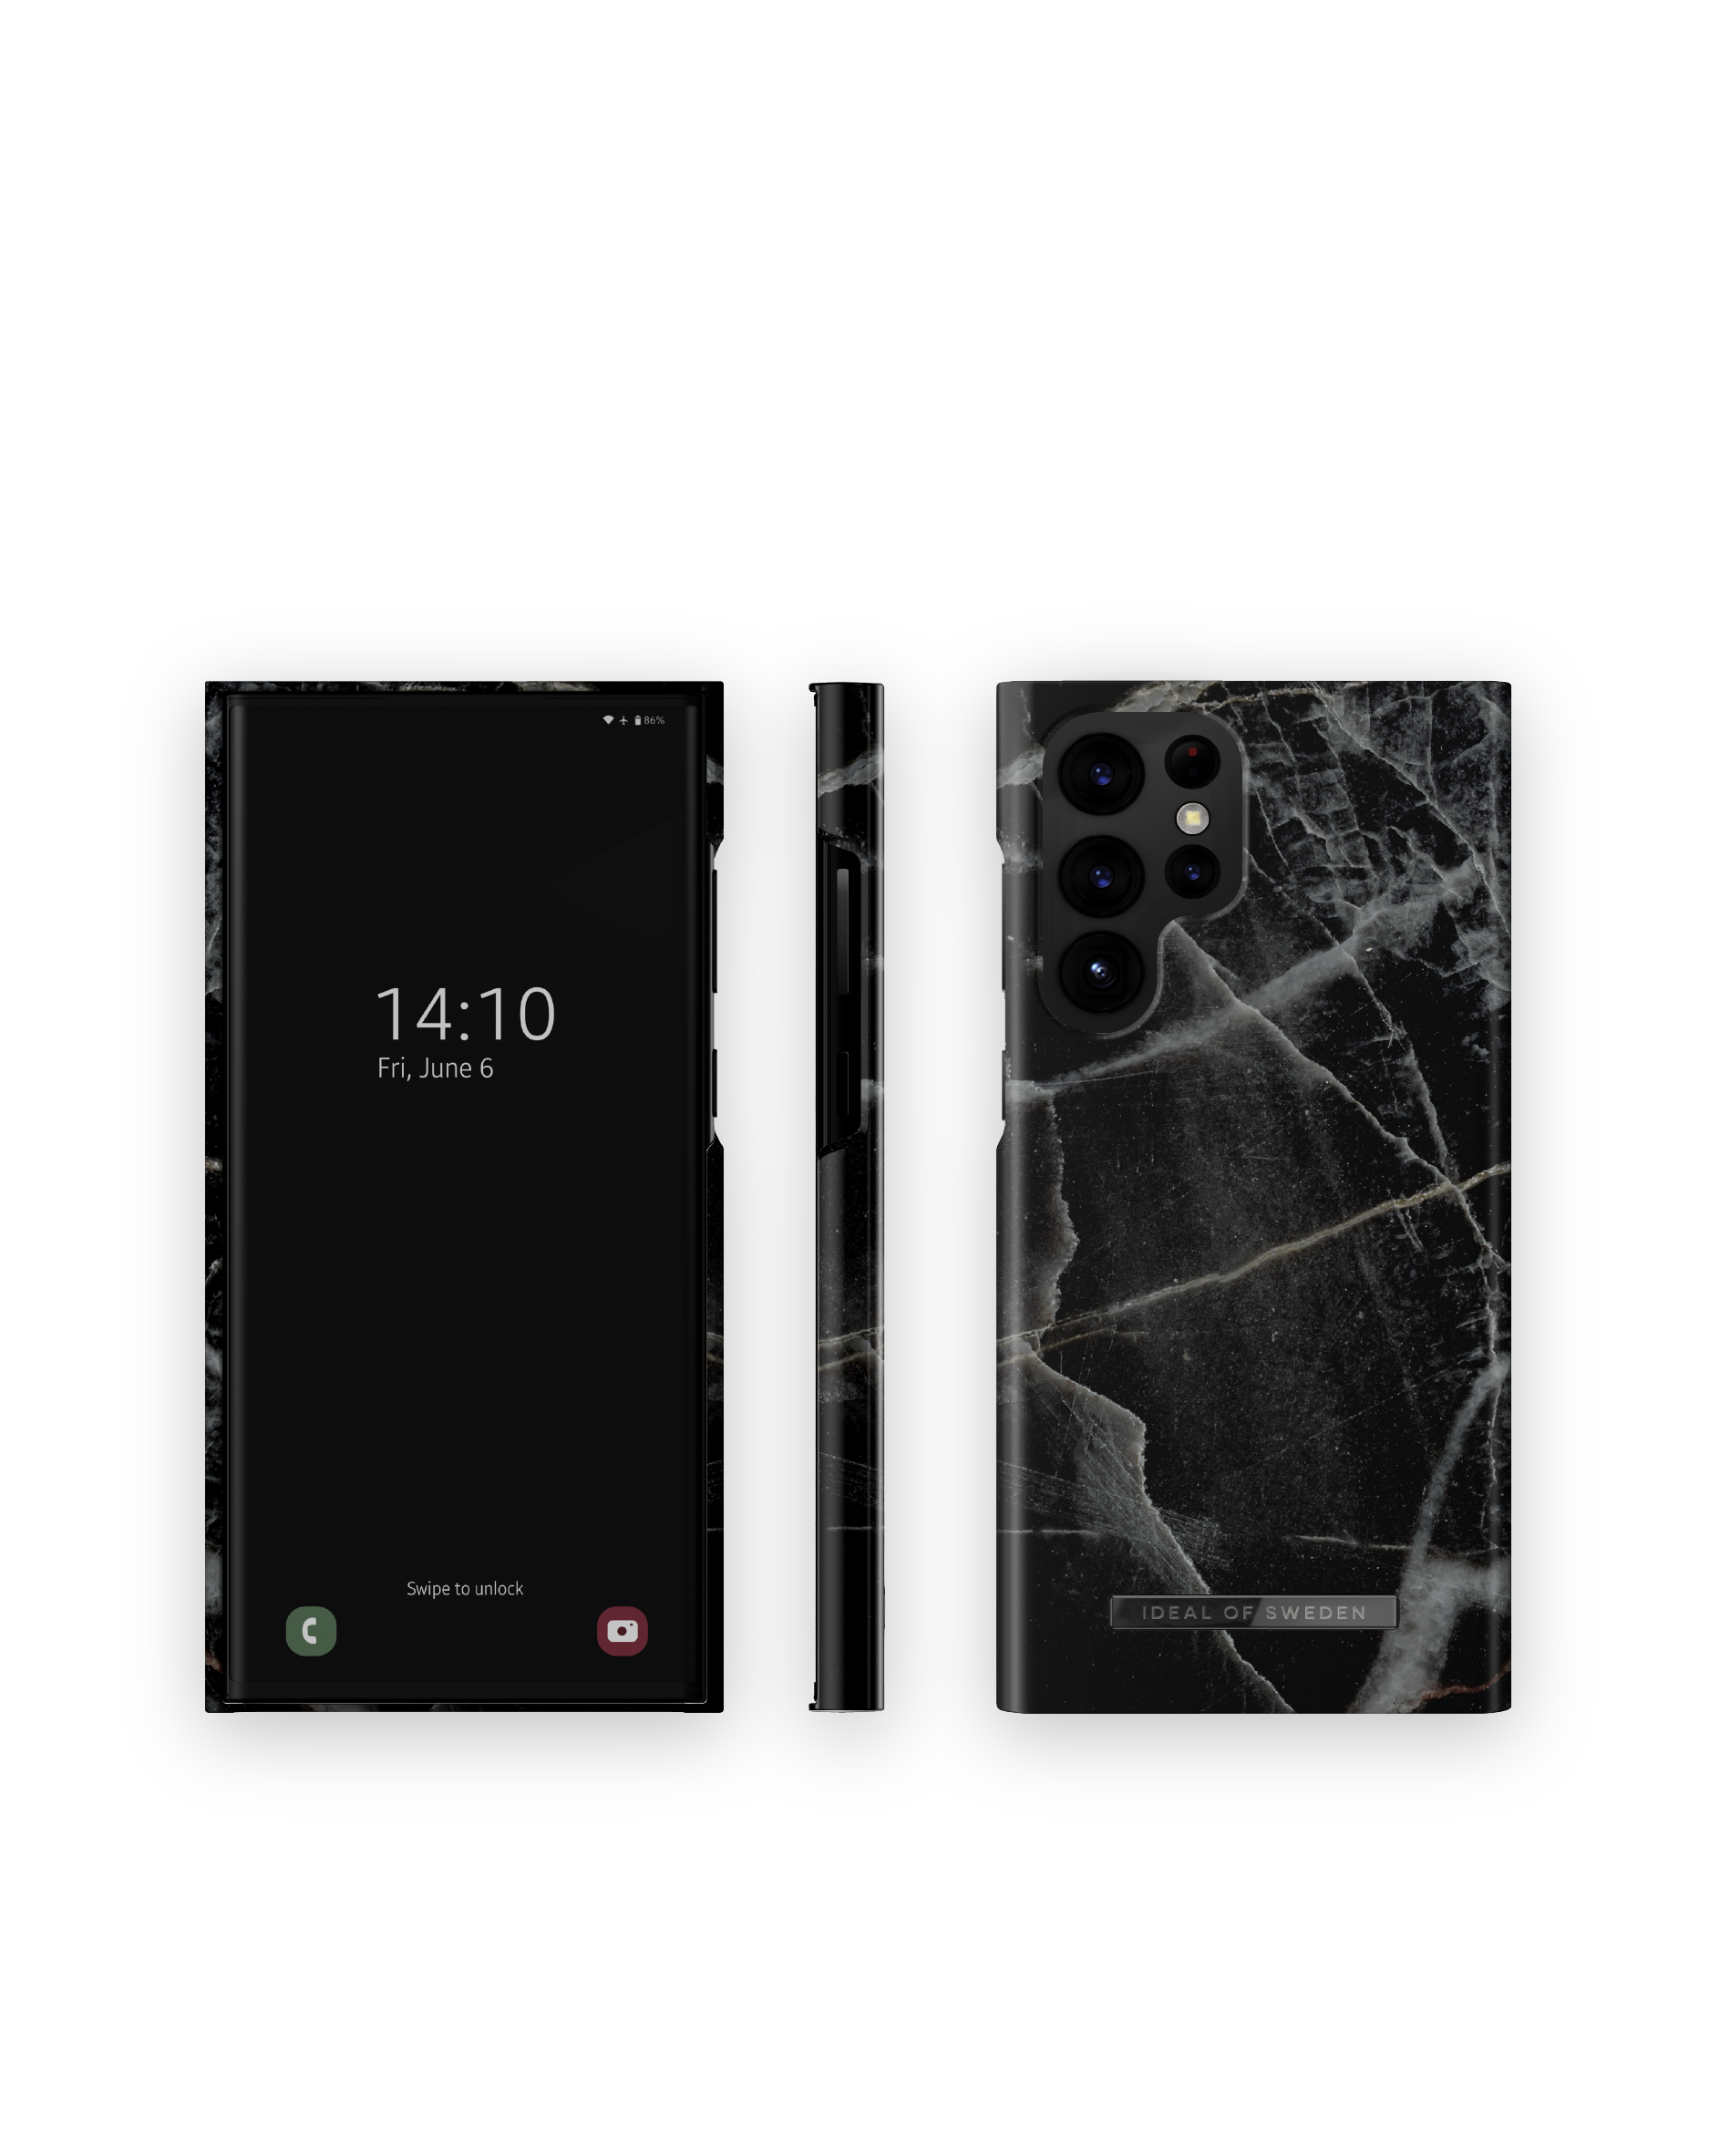 Galaxy Ultra, Thunder IDFCAW21-S22U-358, Black OF Samsung, Backcover, S22 SWEDEN IDEAL Marble